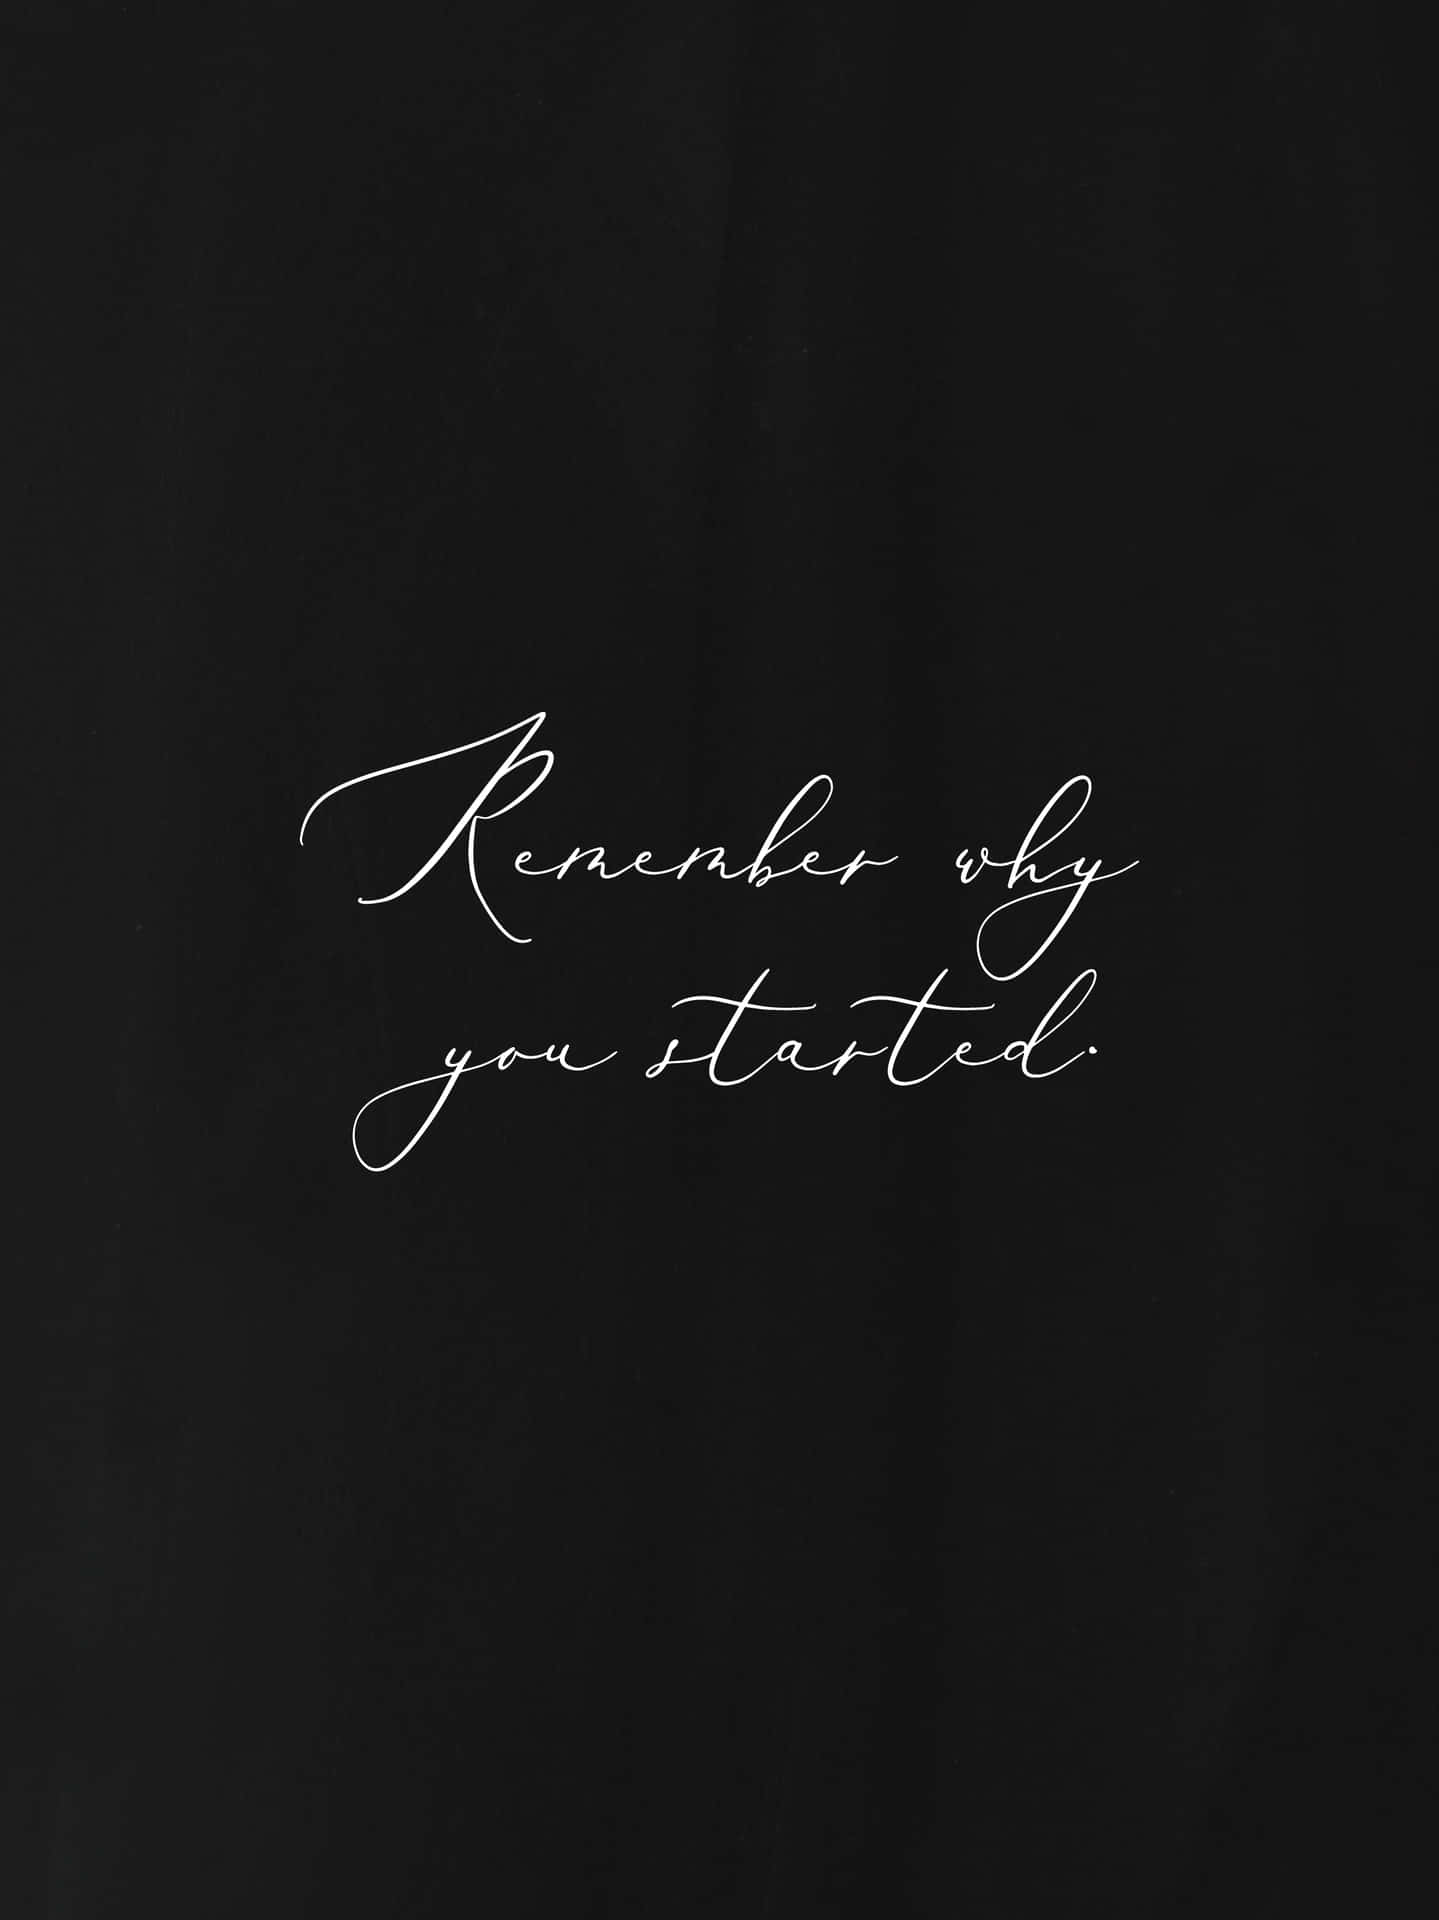 A Black Background With The Words Remember Why You Started Wallpaper